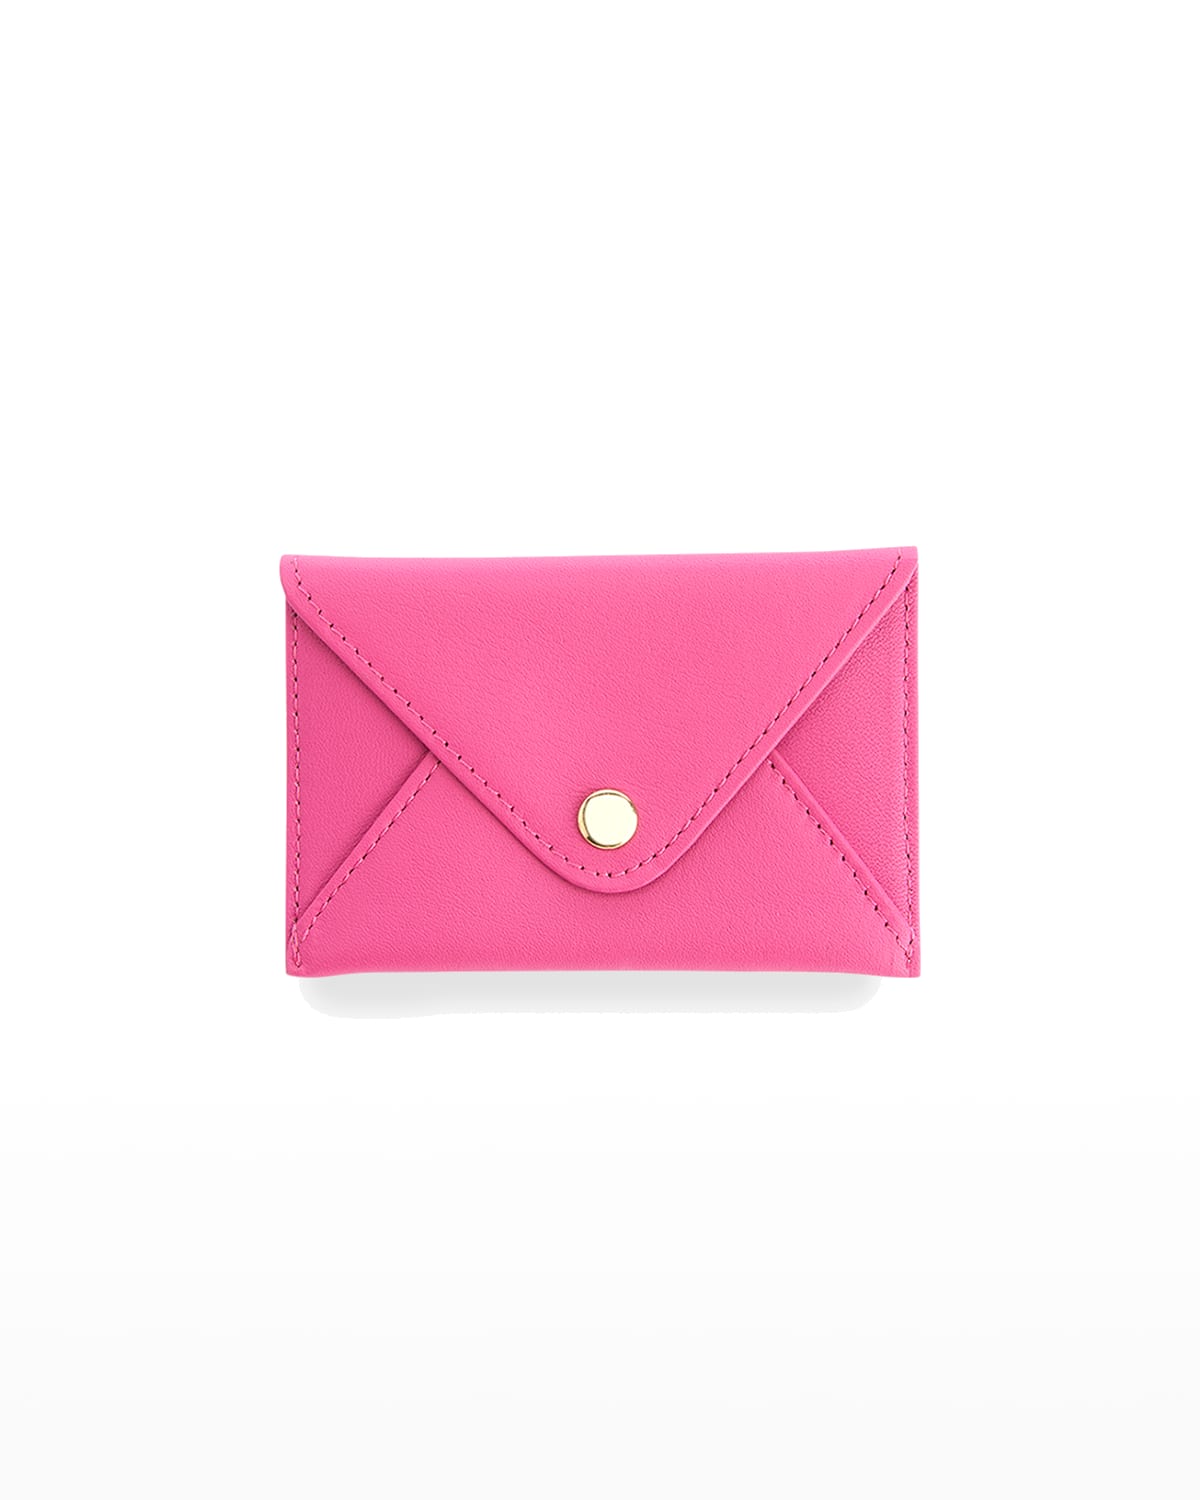 Royce New York Envelope Style Business Card Holder In Bright Pink